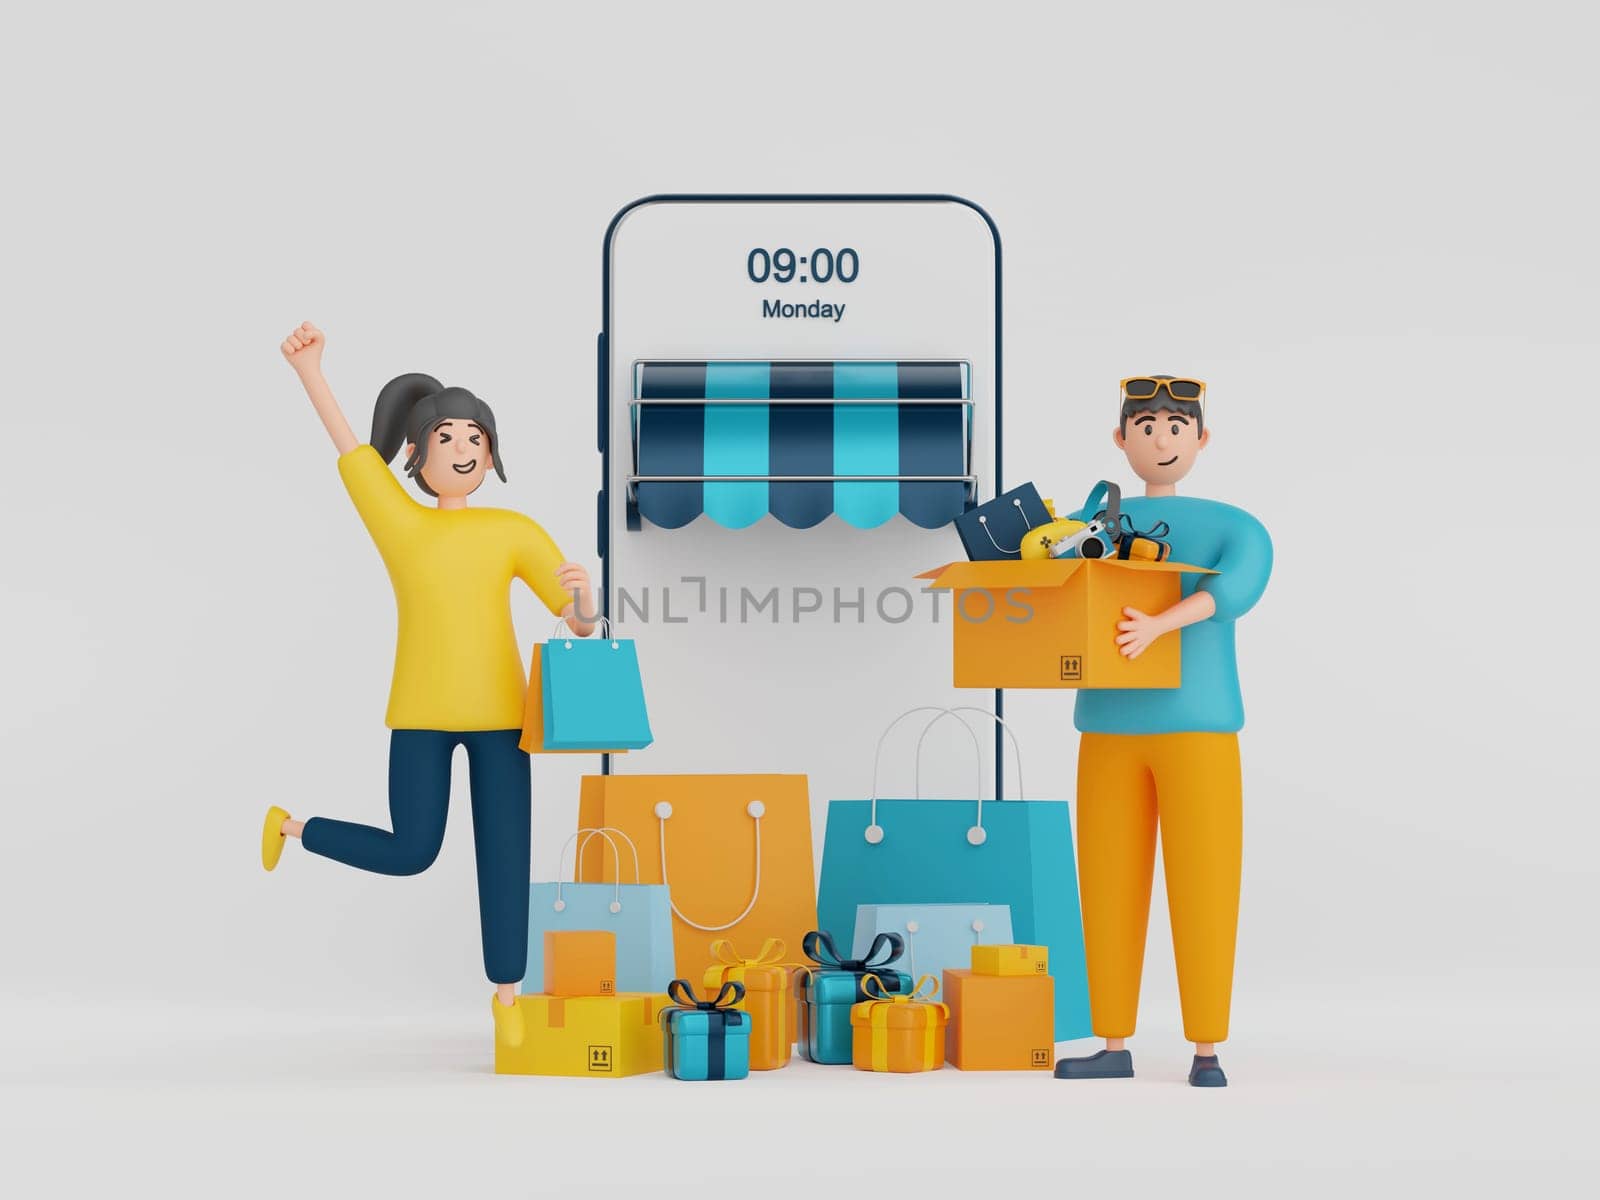 3d illustration of a businessman character shopping online via application on smartphone with shopping item.